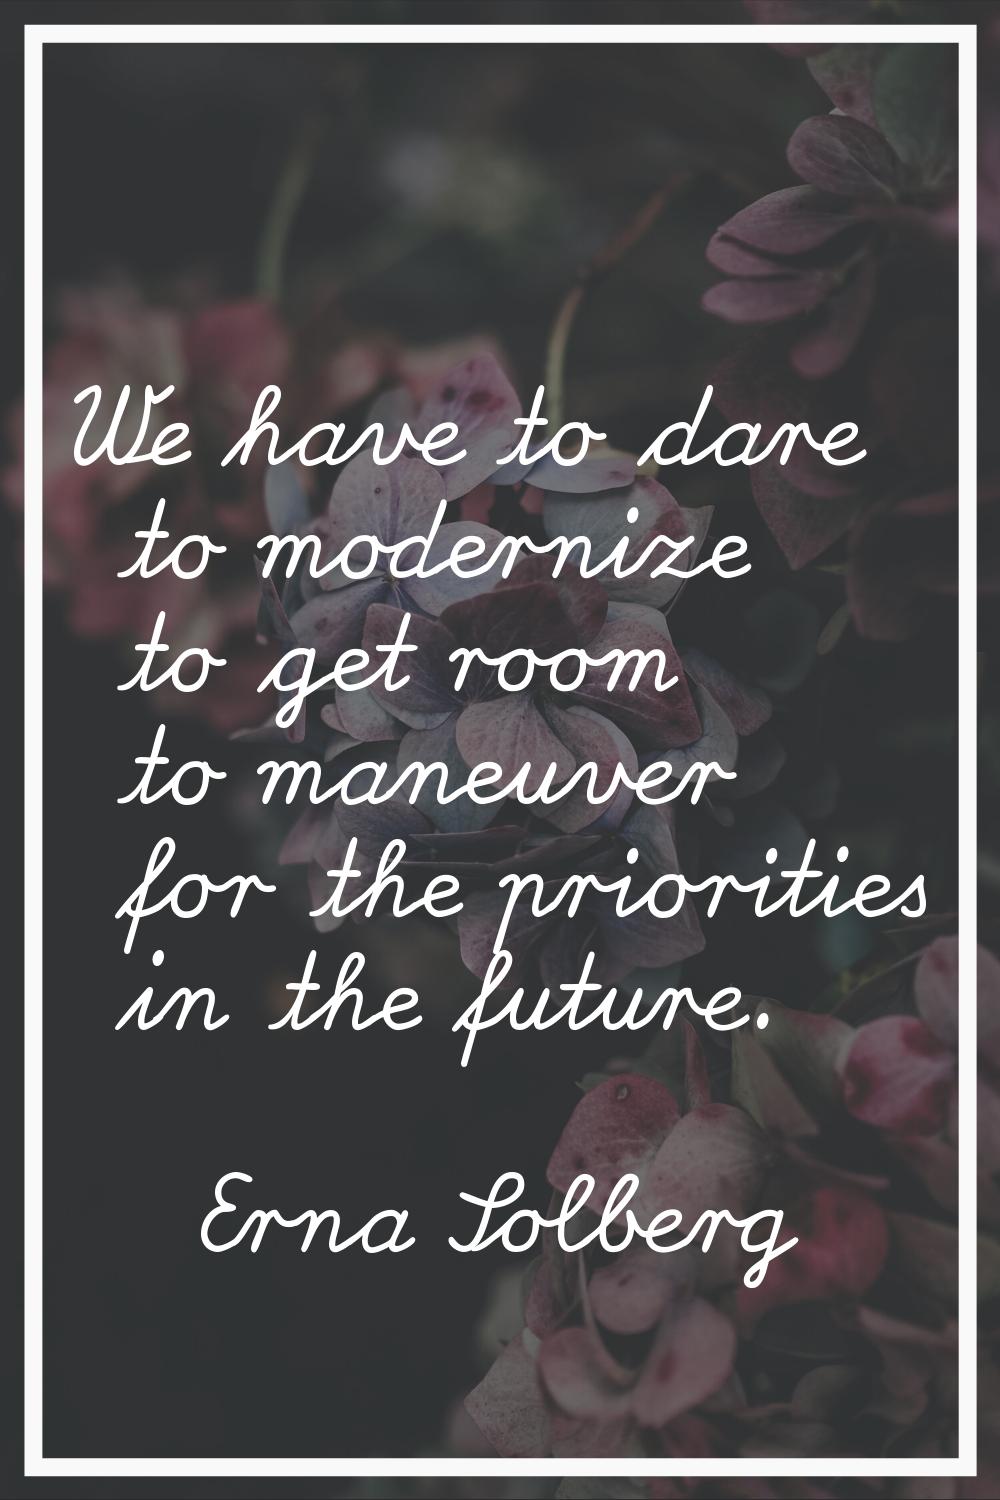 We have to dare to modernize to get room to maneuver for the priorities in the future.